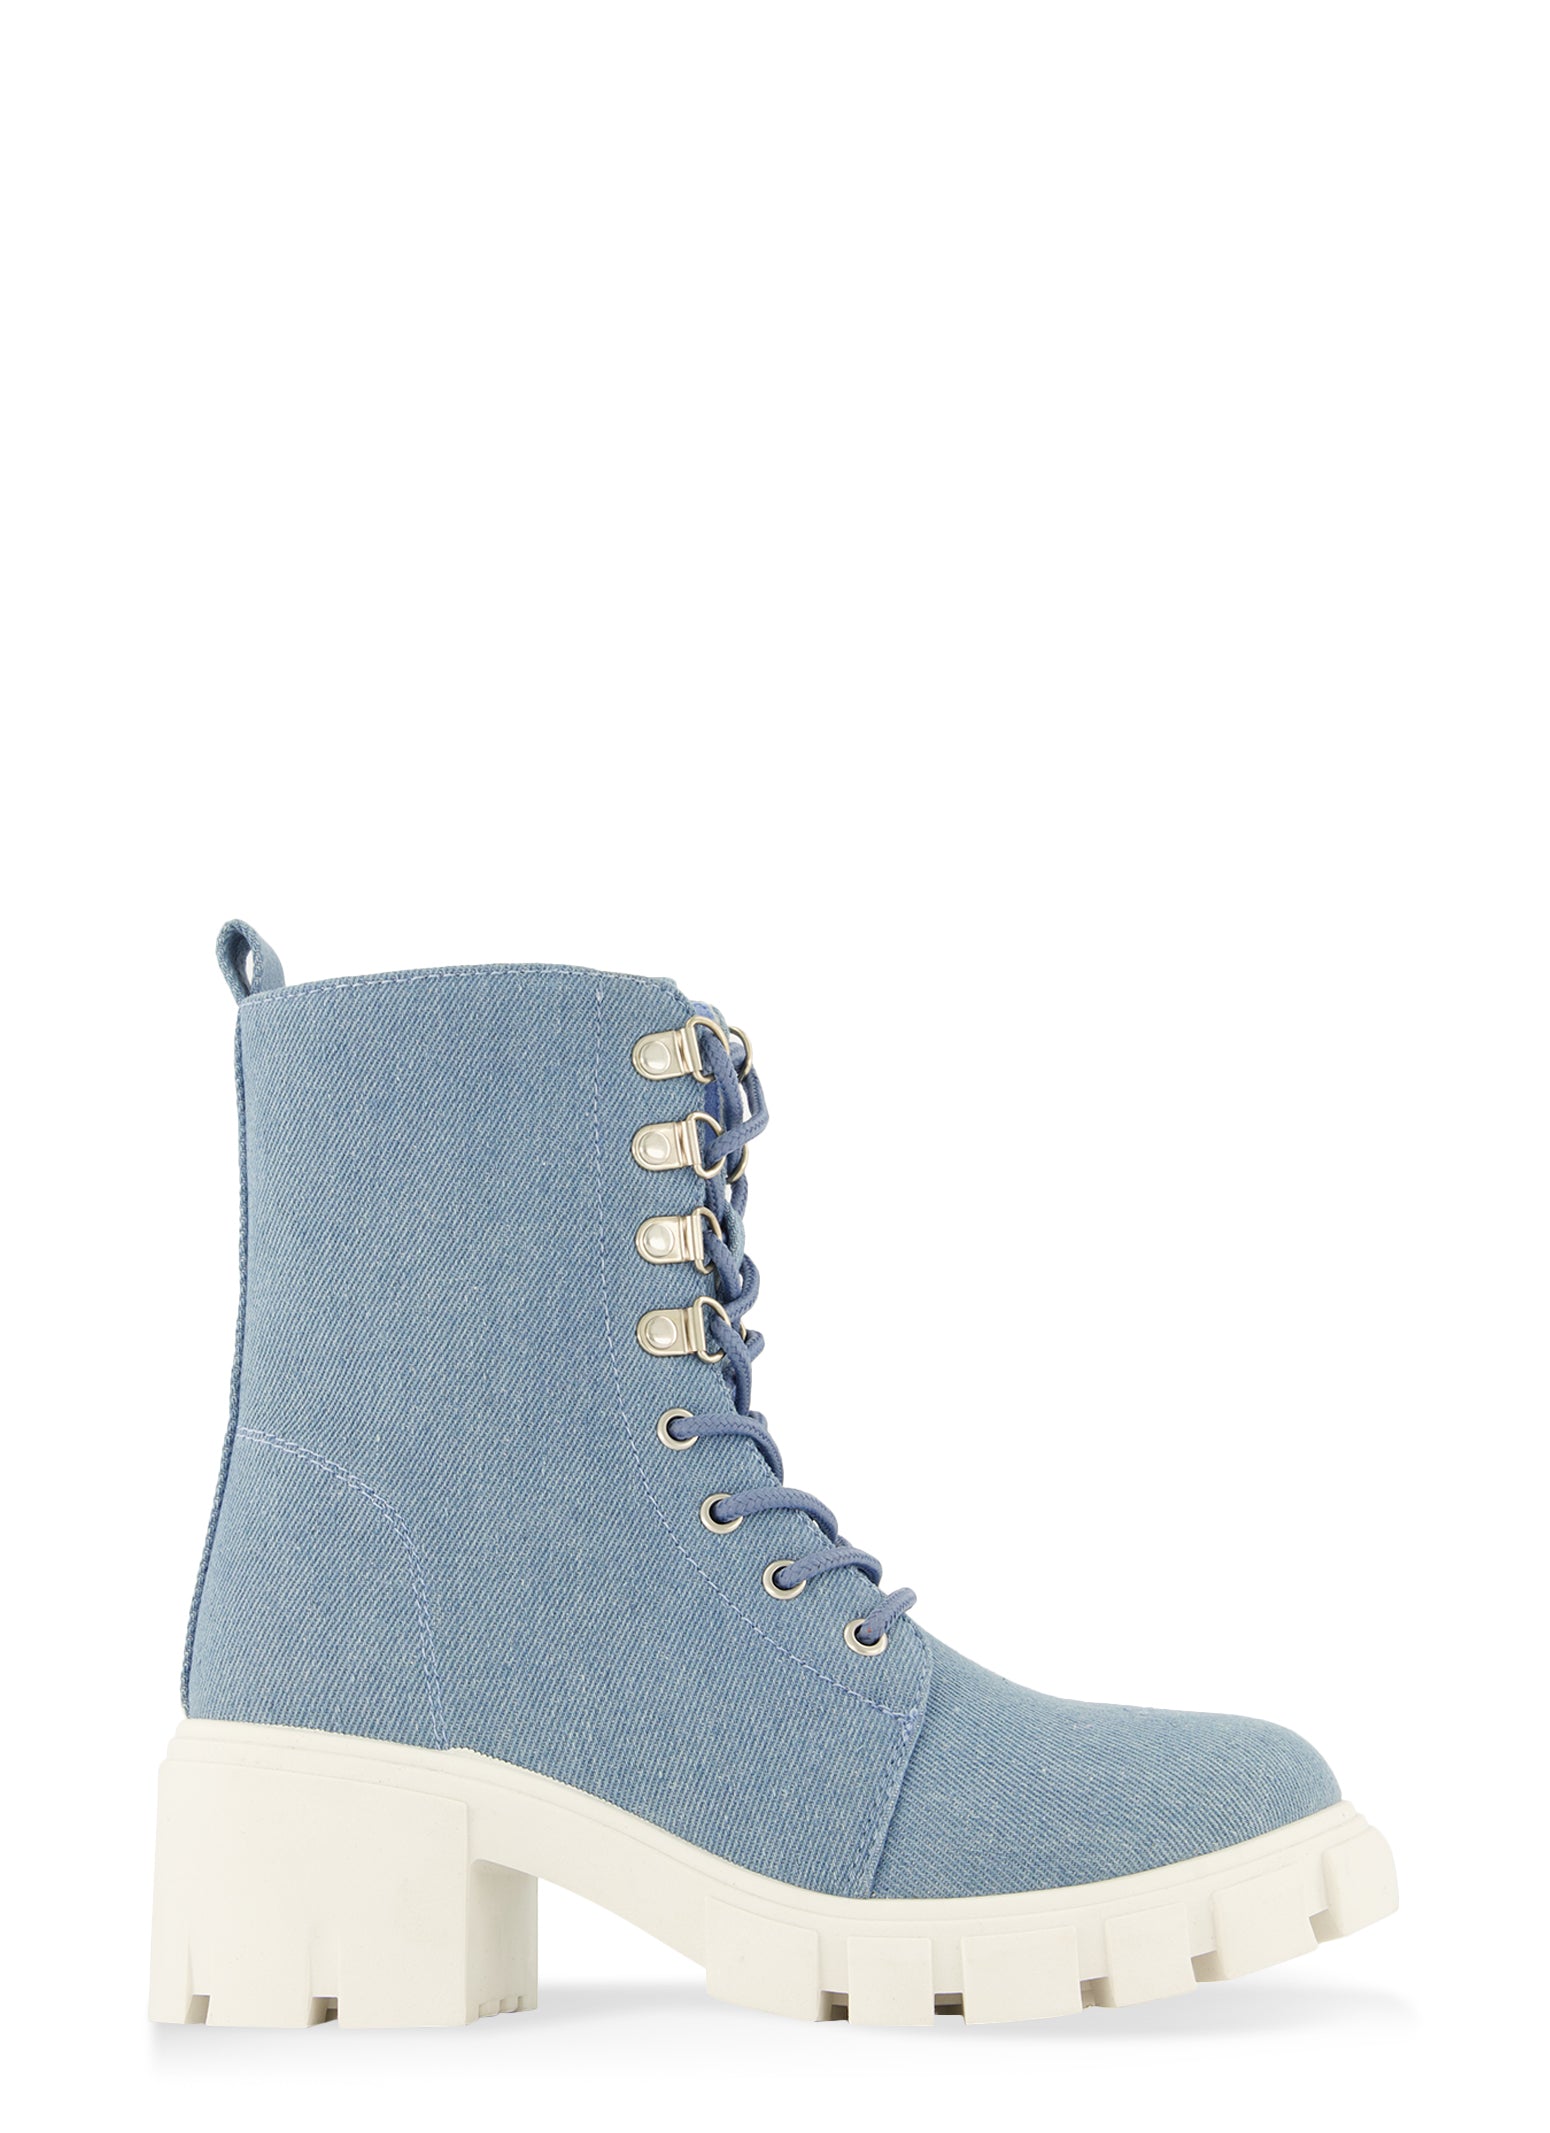 Blue Denim Jeans Lace Up High Top Womens Military Combat Boots Shoes